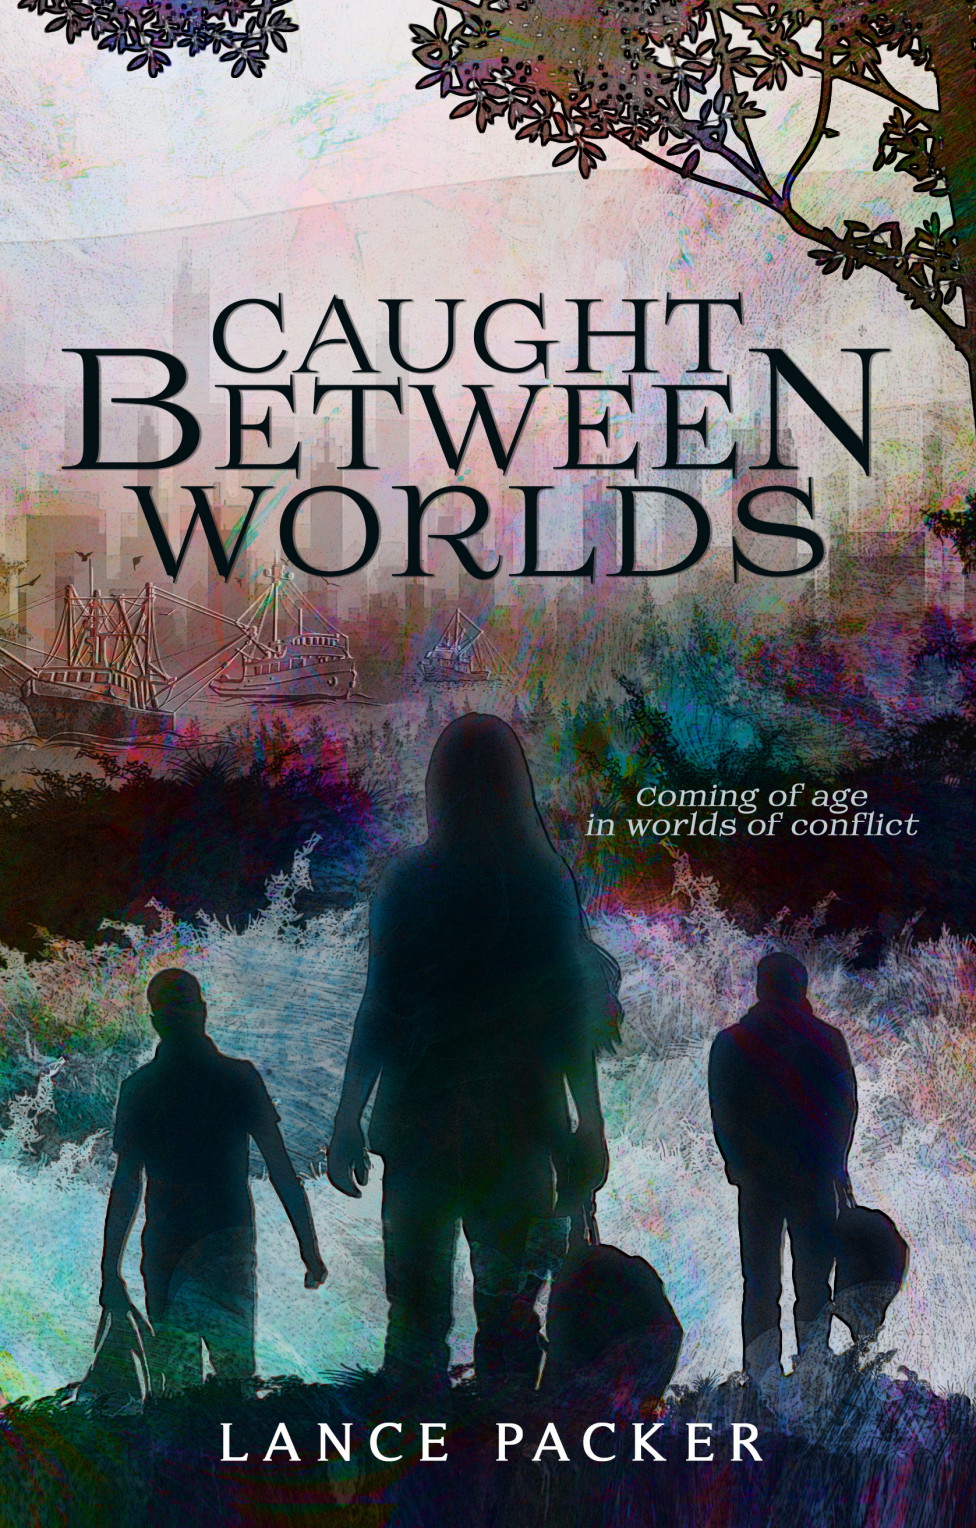 Caught Between Worlds by Lance Packer